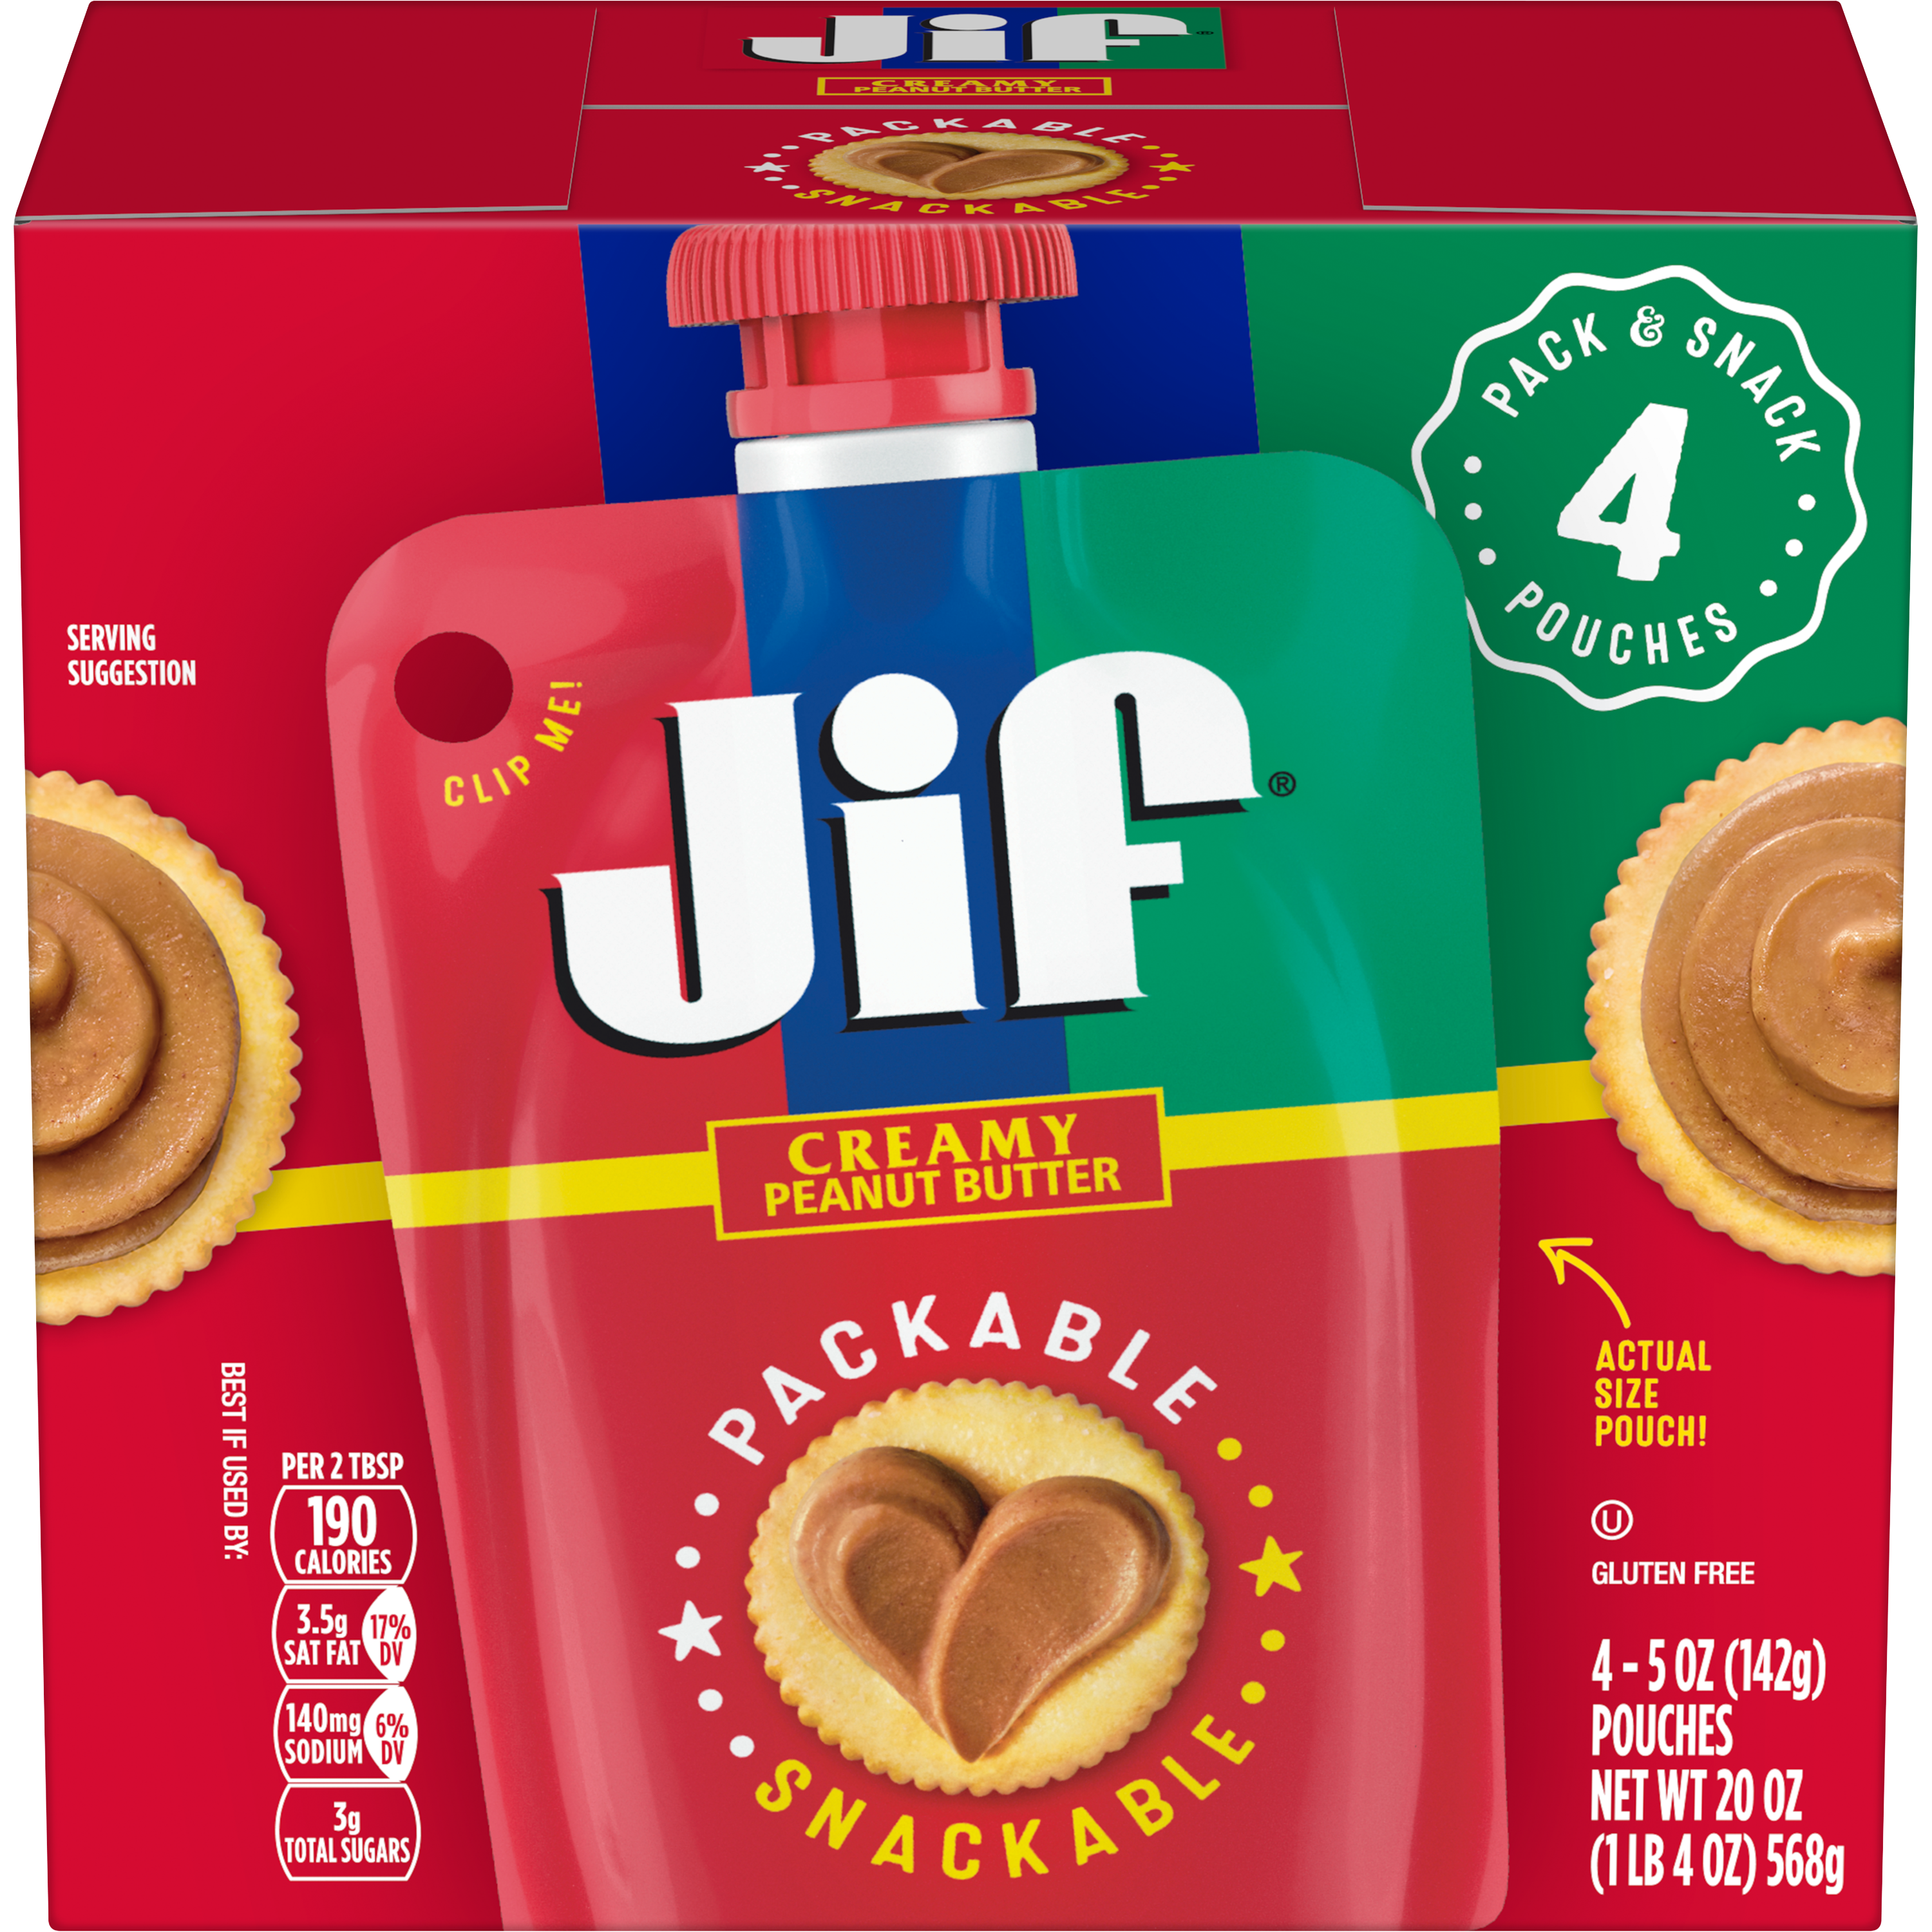 Jif Peanut Butter Limited Edition 'Stainless Steel 4 Piece